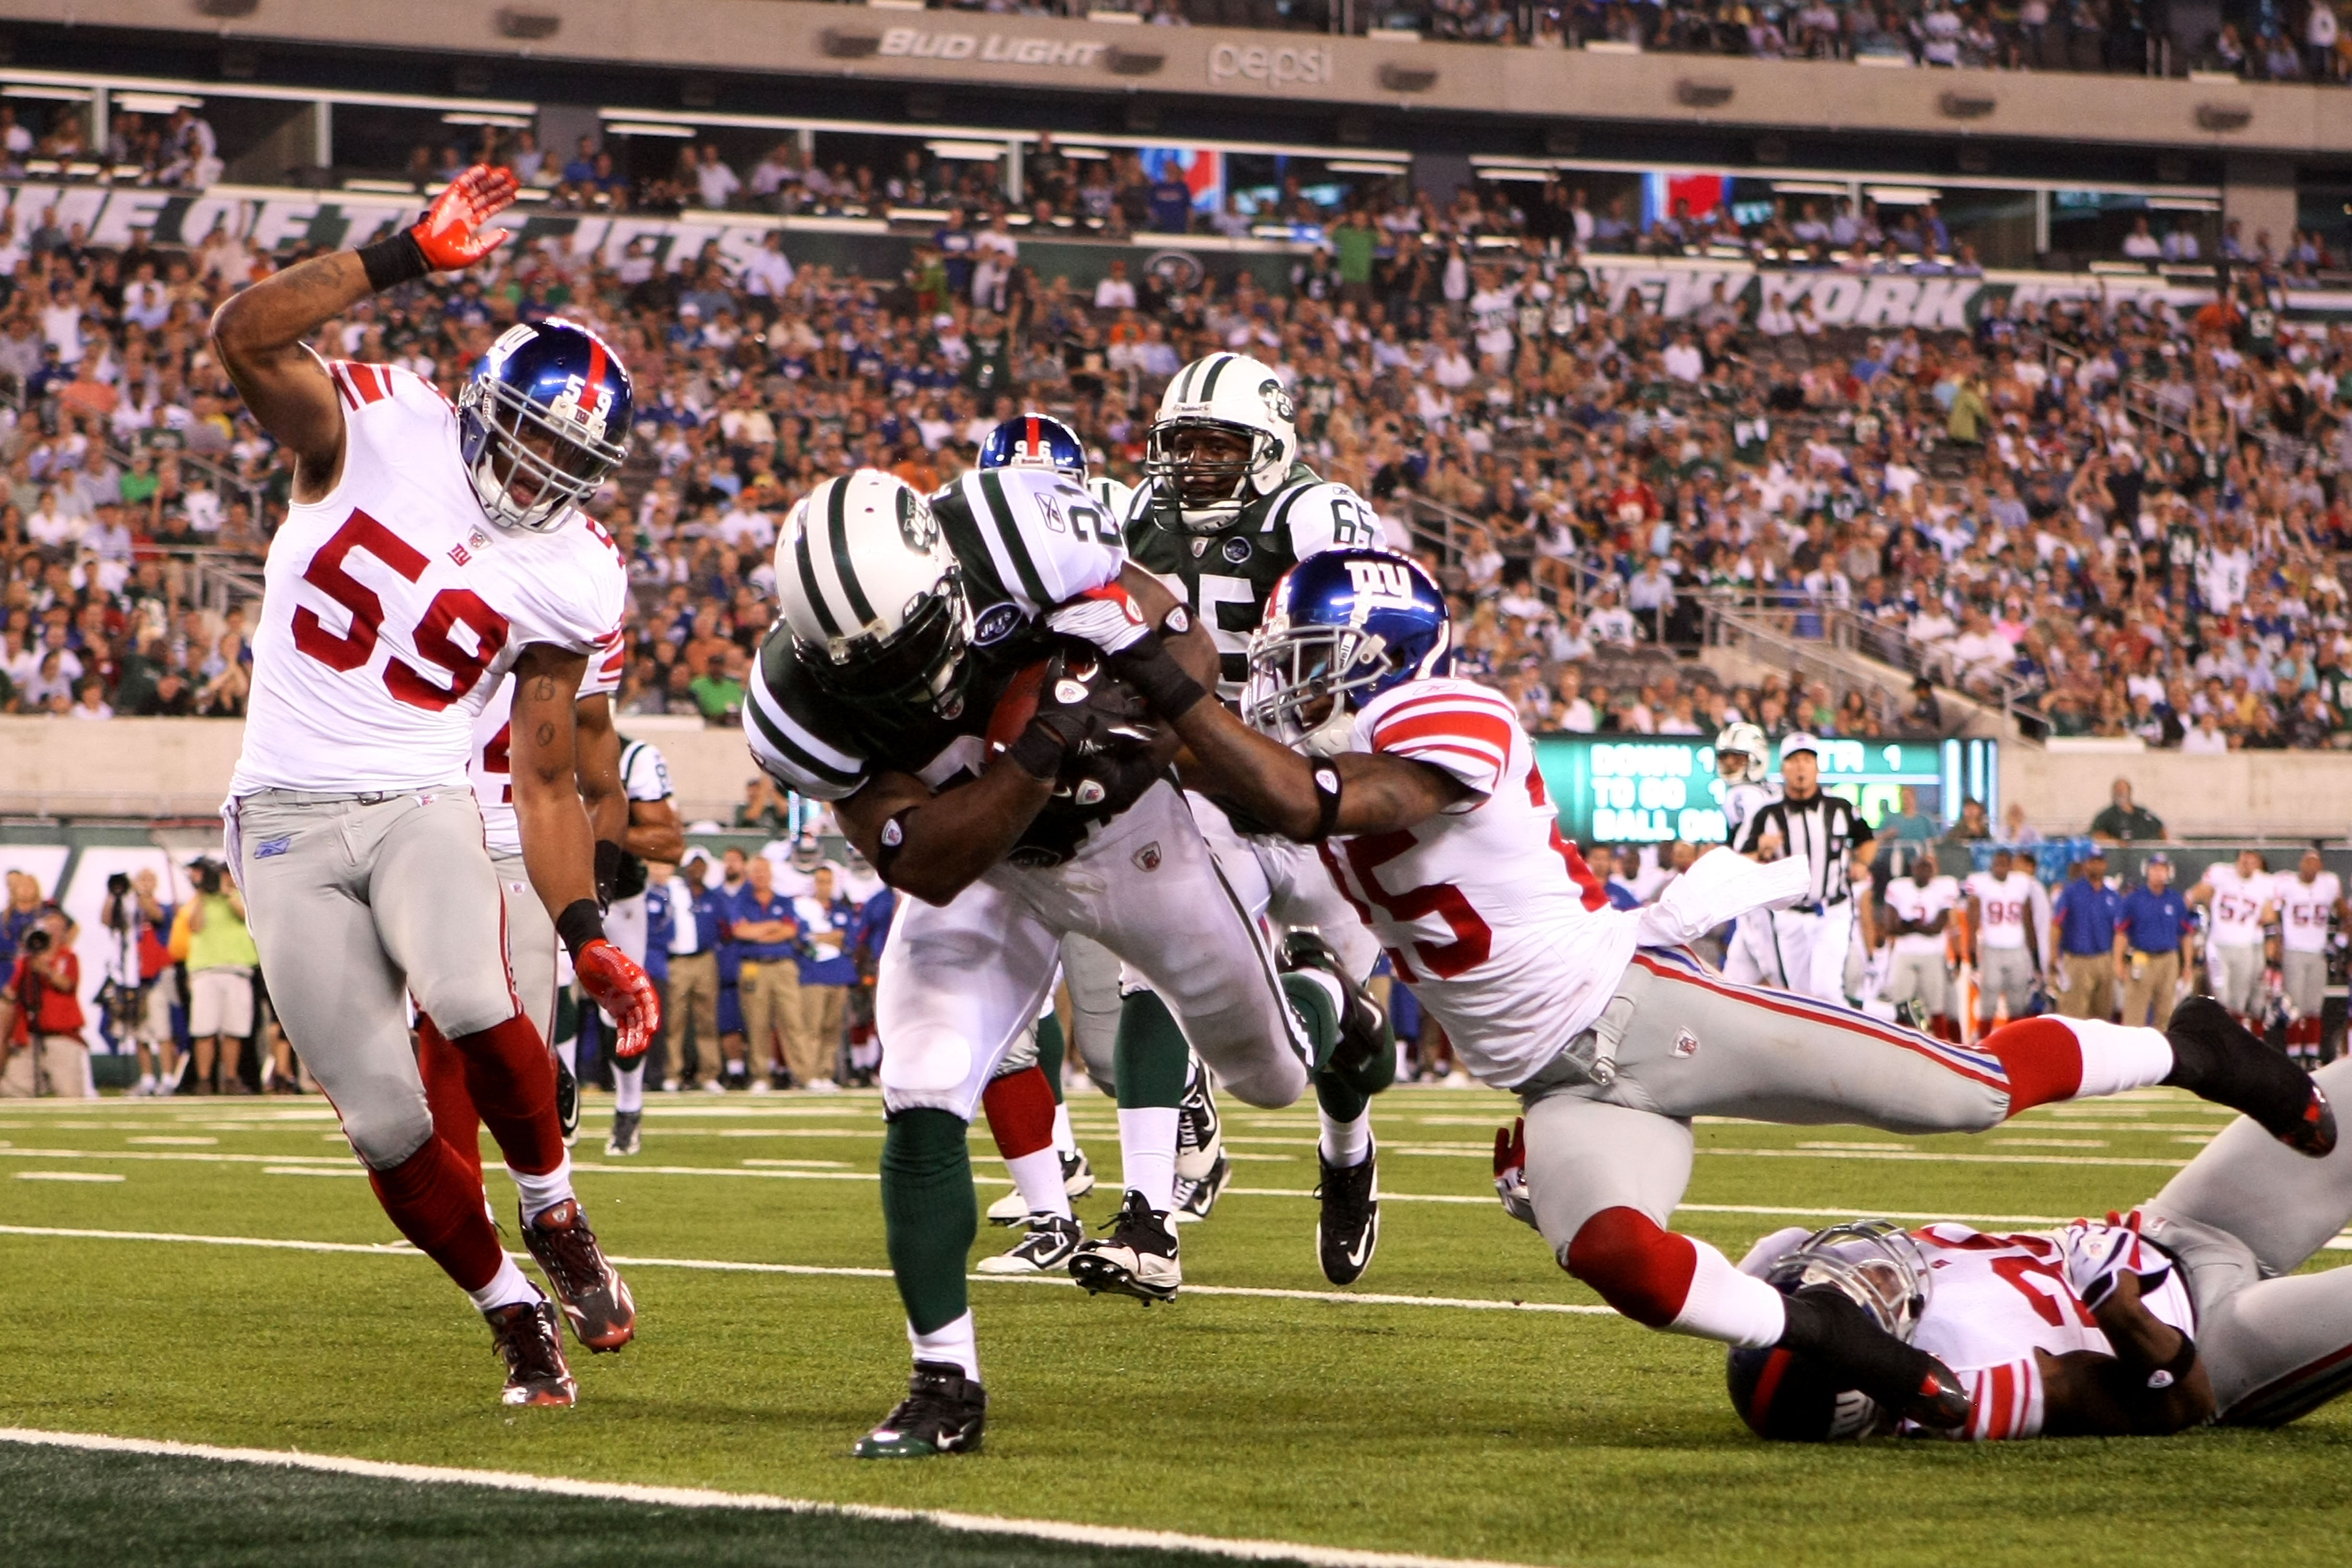 EAST RUTHERFORD, NJ - AUGUST 16:  LaDanian Tomlinson #21 of the New York Jets falls into the endzone for a touchdown that was eventually called back during their game against the New York Giants at New Meadowlands Stadium on August 16, 2010 in East Ruther